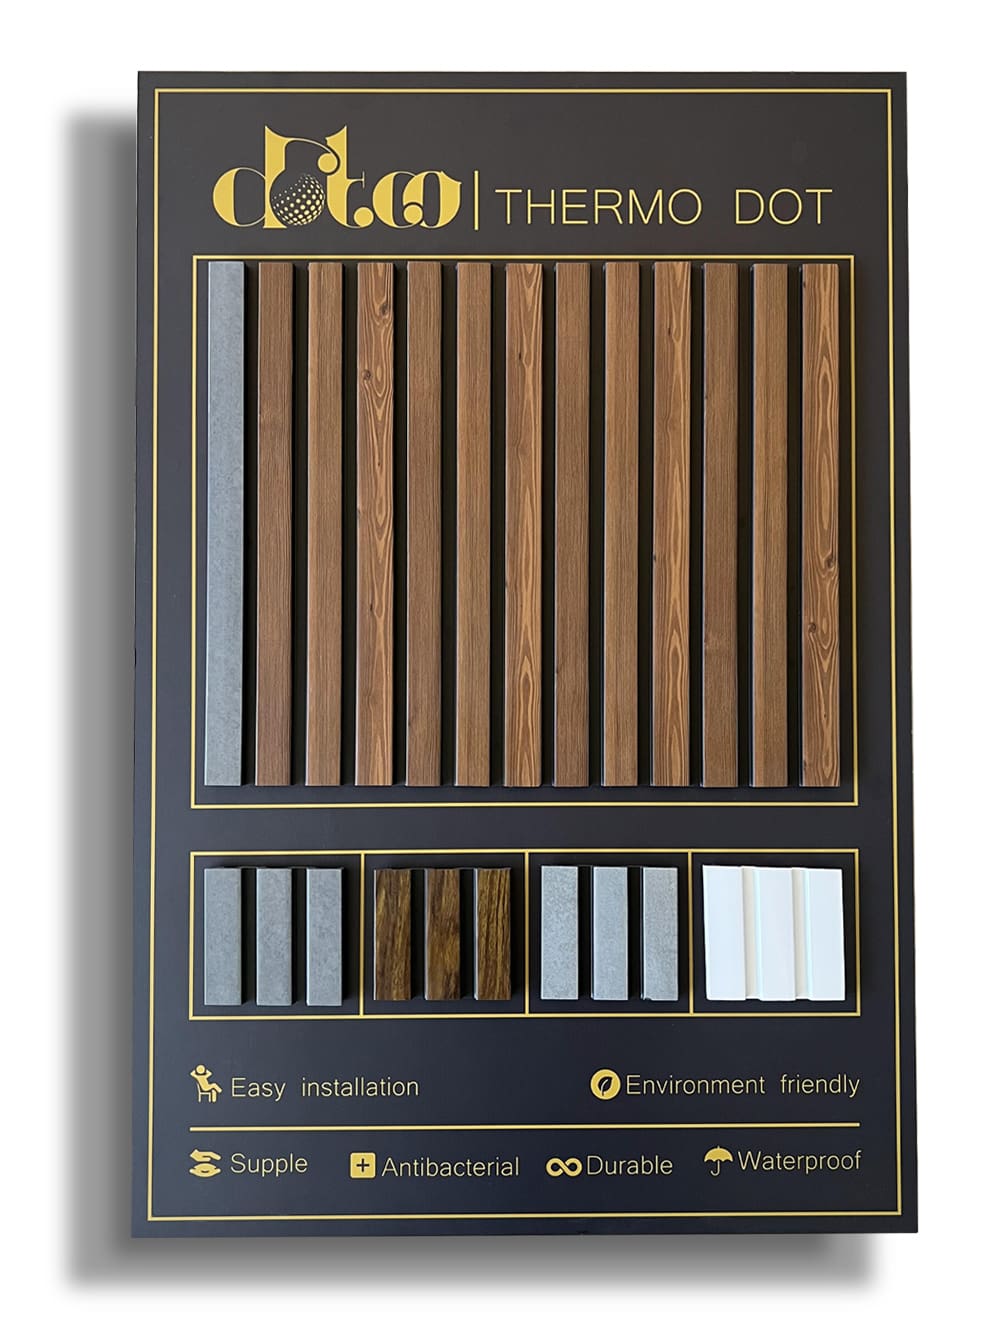 Thermo Dot